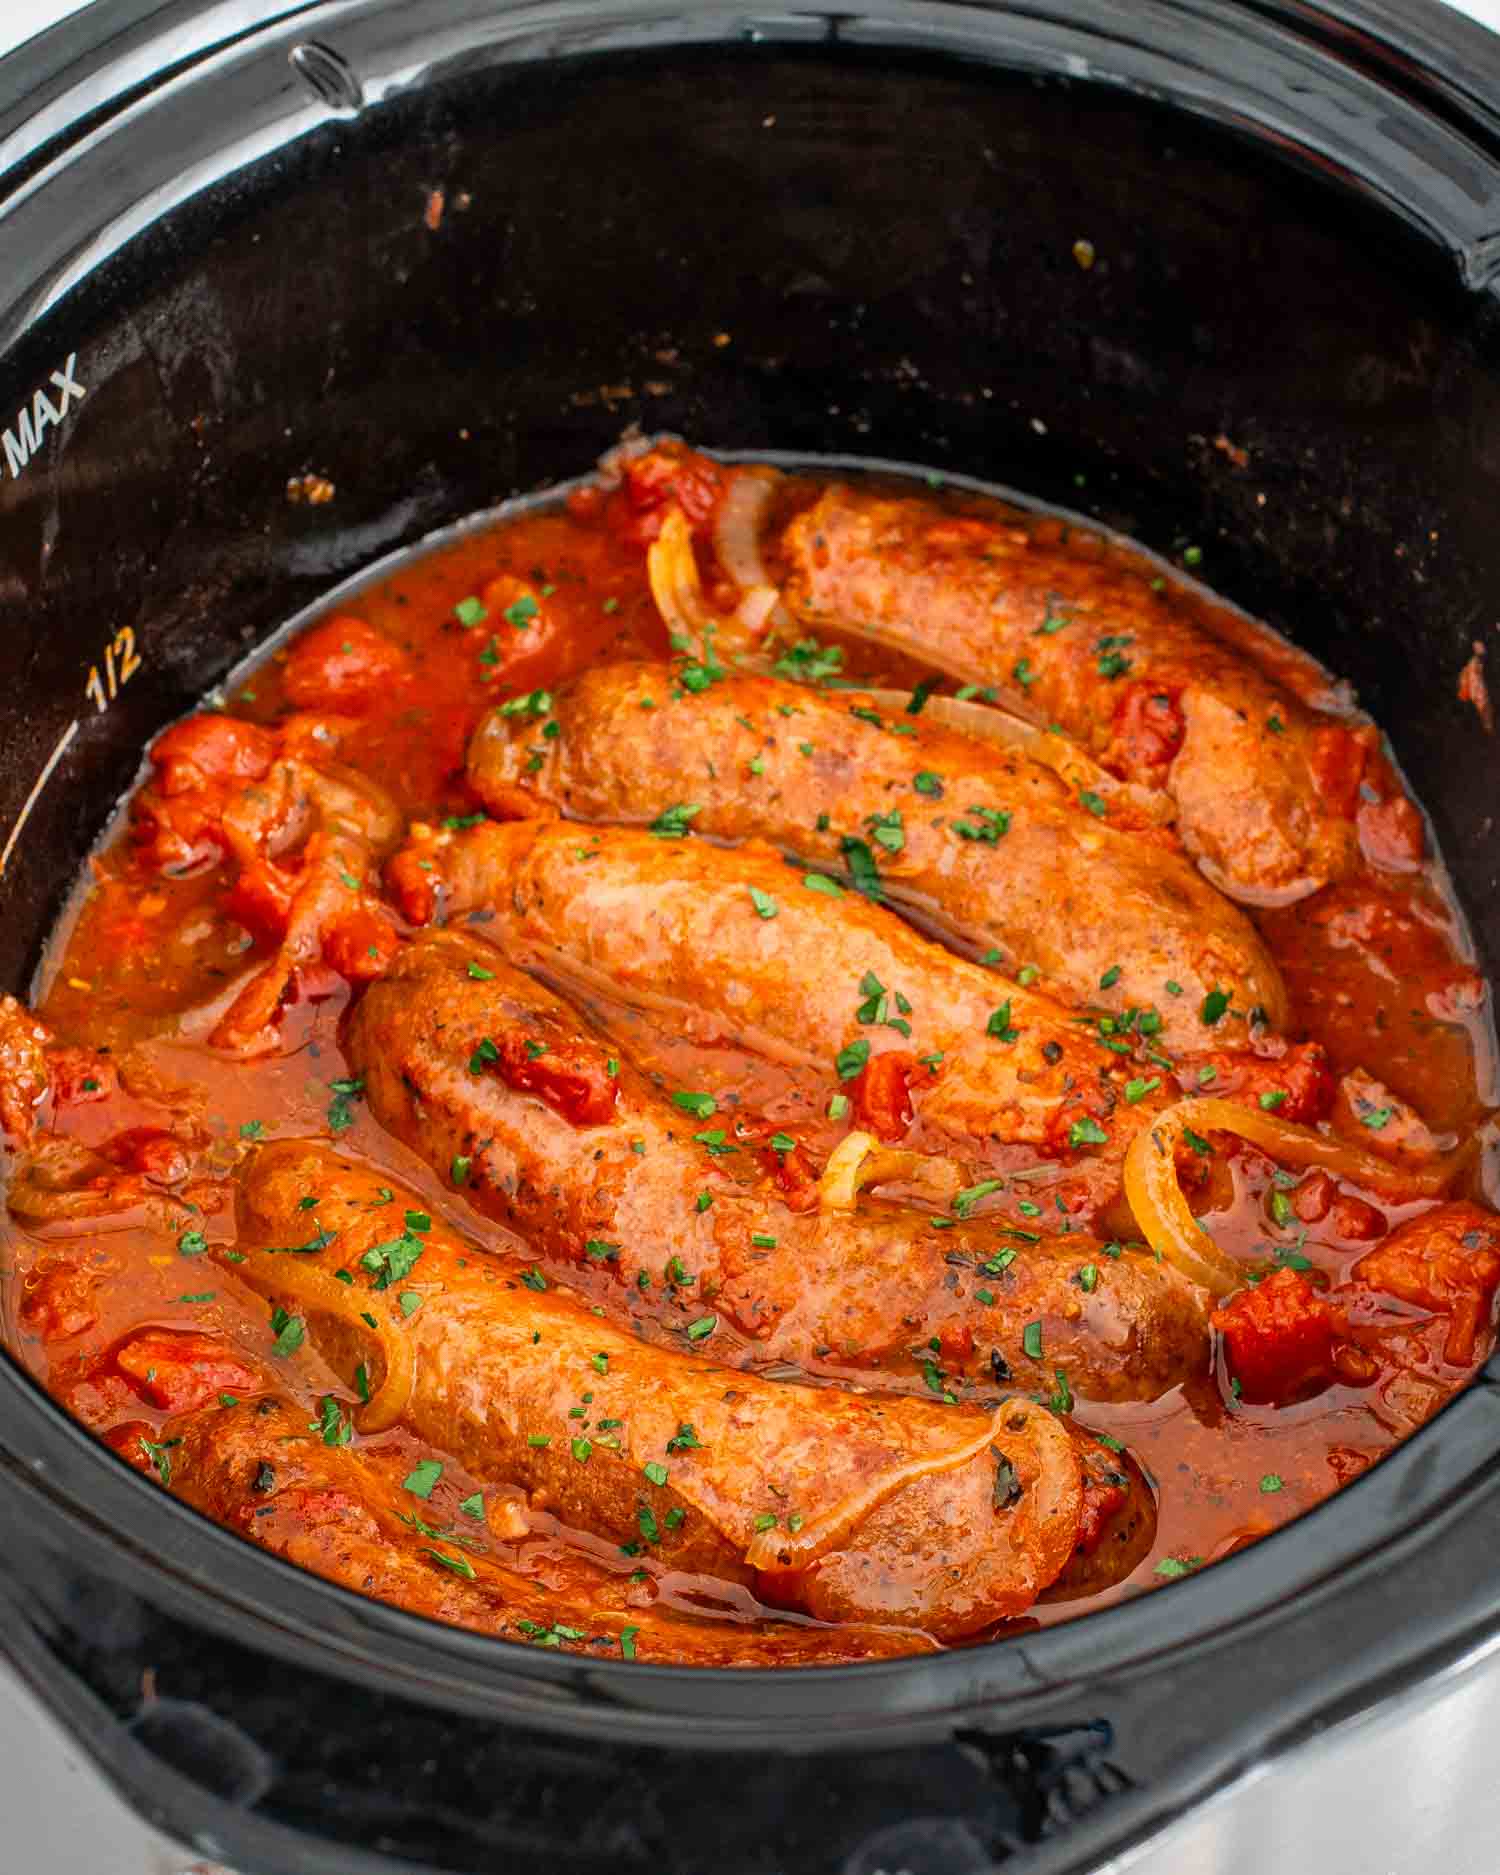 slow cooker sausage and peppers freshly made.